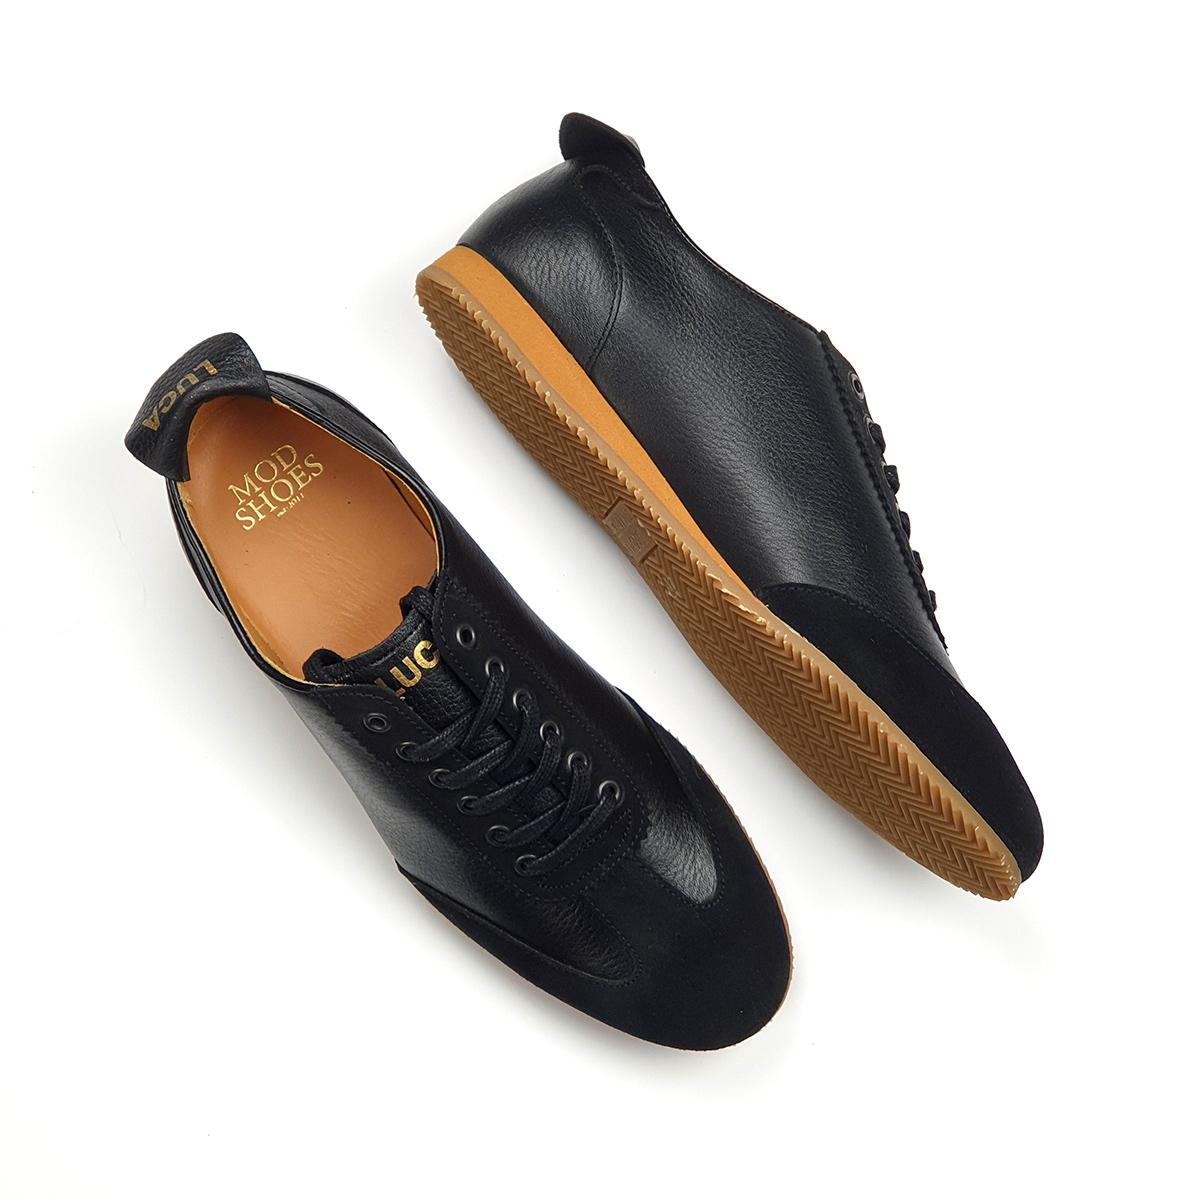 The Luca In Black Leather & Suede – Old School Trainers – Mod Shoes